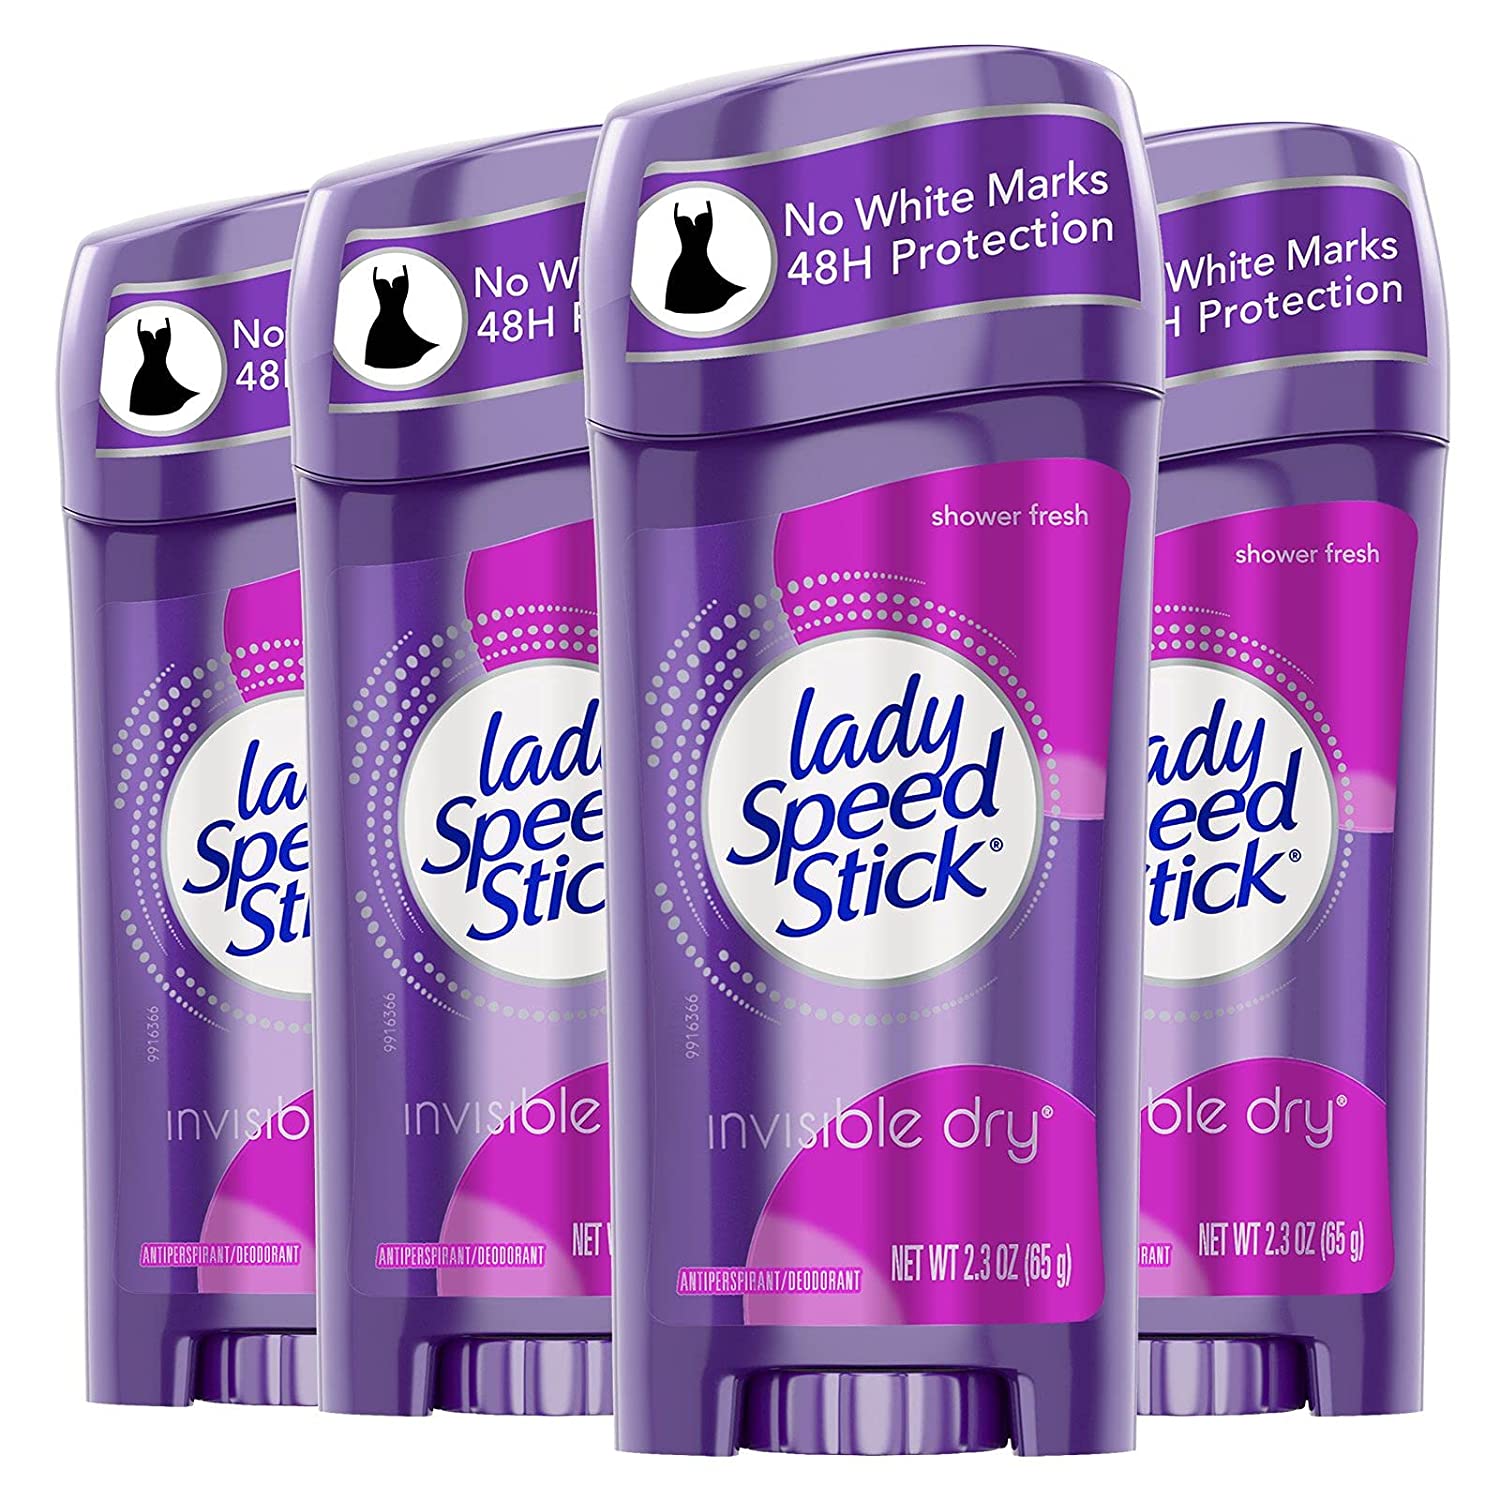 4-Pack 2.3-Oz Lady Speed Stick Invisible Dry Antiperspirant Deodorant (Shower Fresh) $5.75 w/ S&S + Free Shipping w/ Prime or on orders over $25